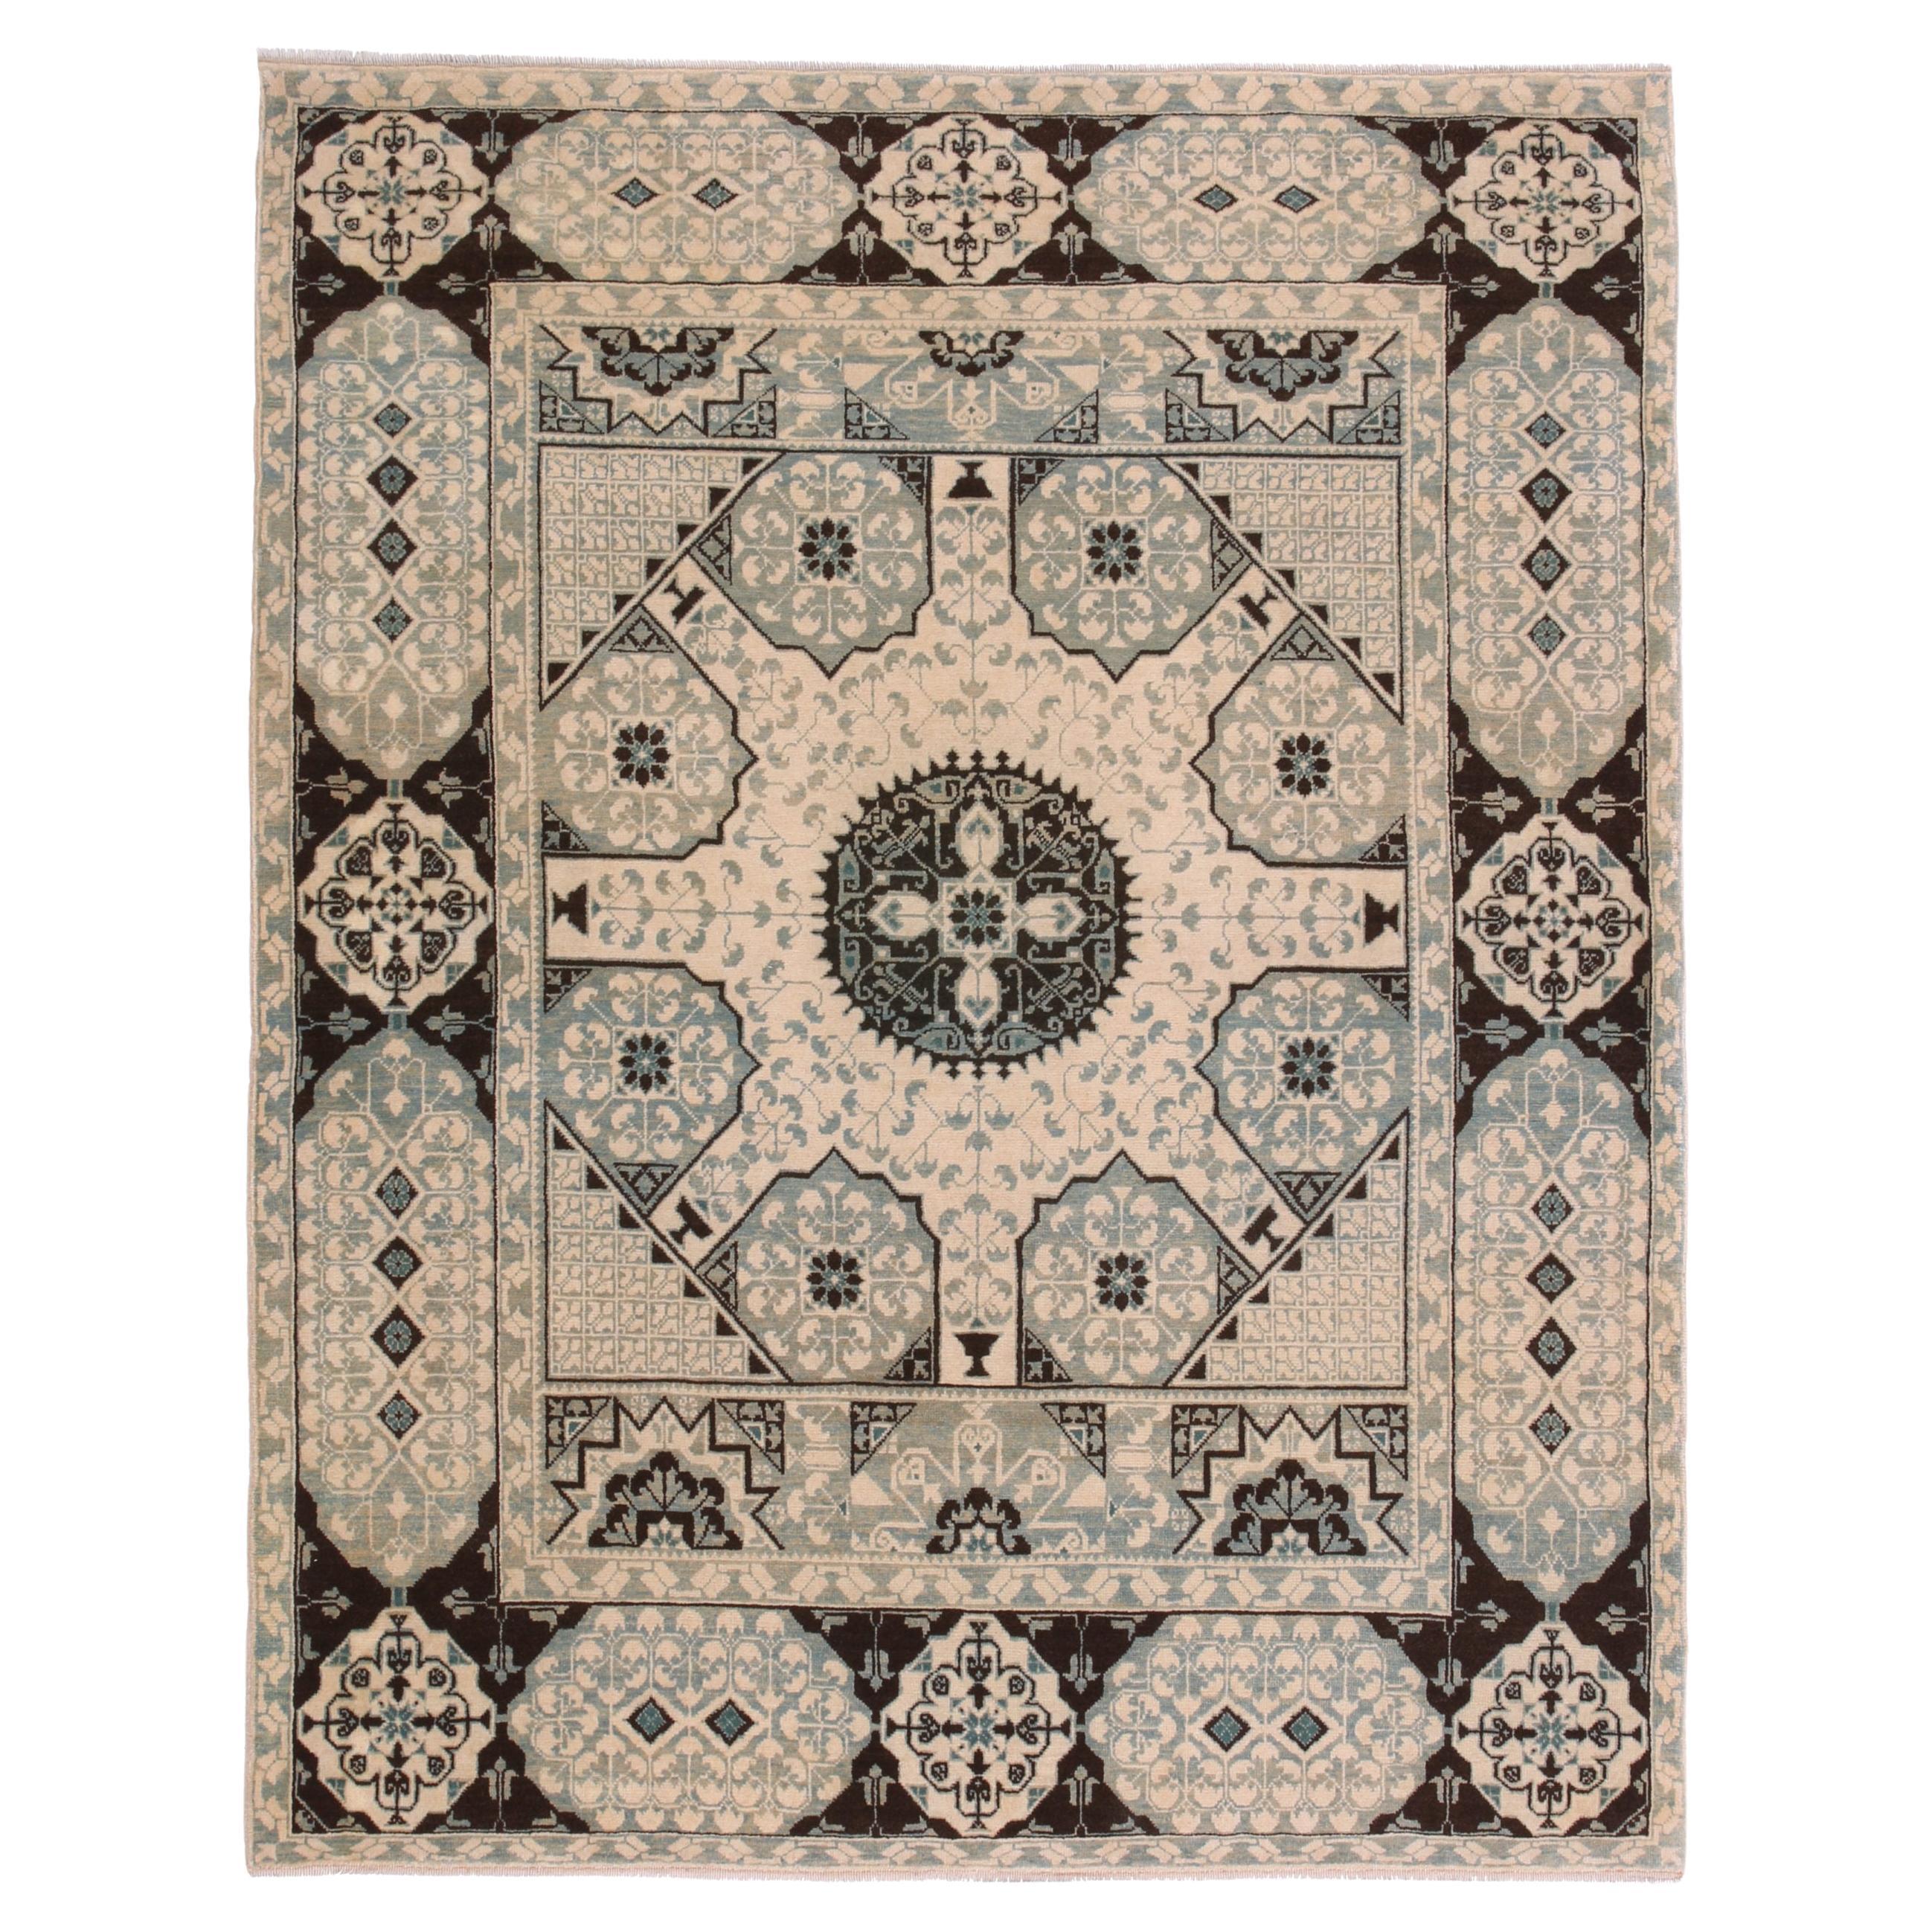 Ararat Rugs Mamluk Carpet with Cup Motif, Antique Revival Rug, Natural Dyed For Sale